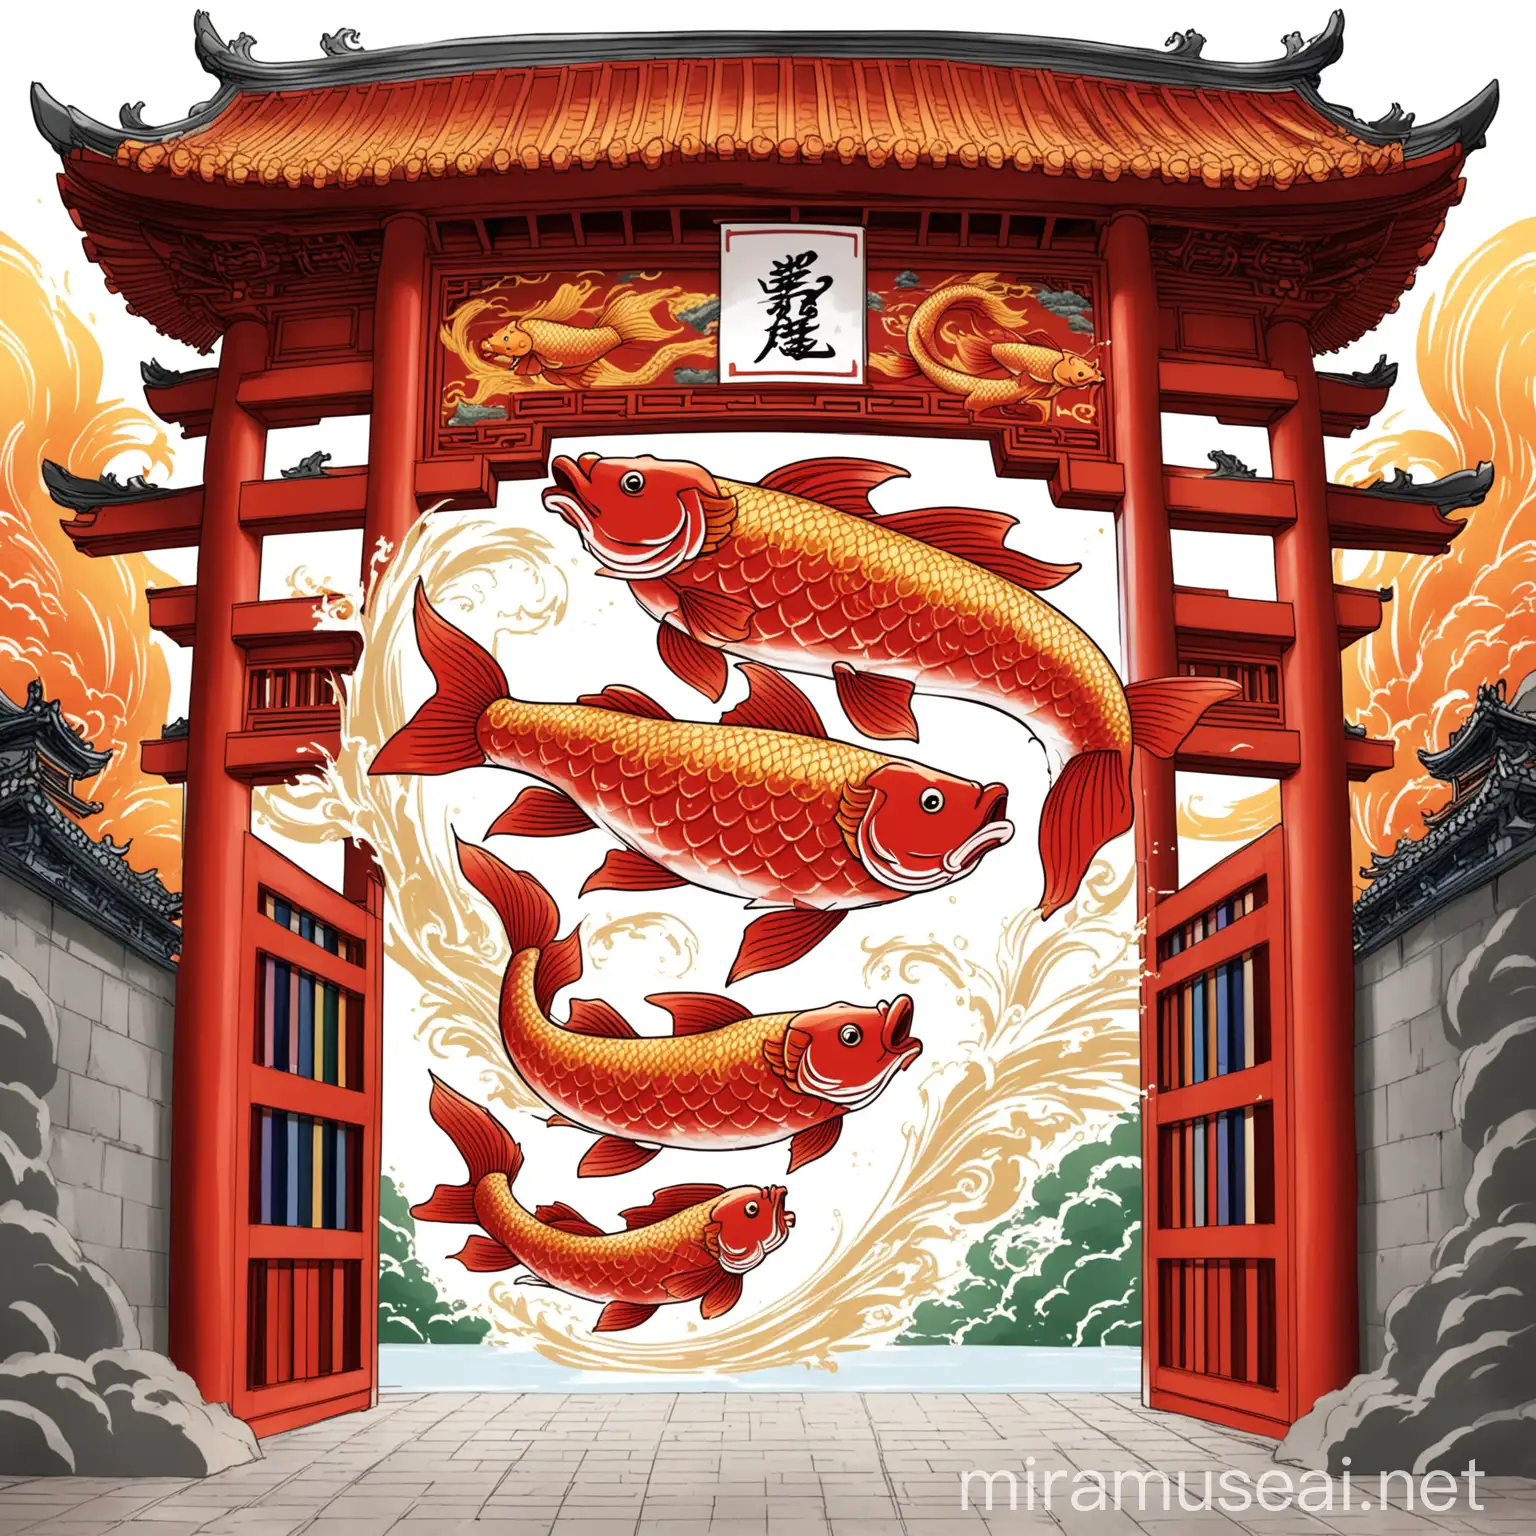 The image of carp leaping over the dragon gate, to bless students in their exams, with three colors in the image.